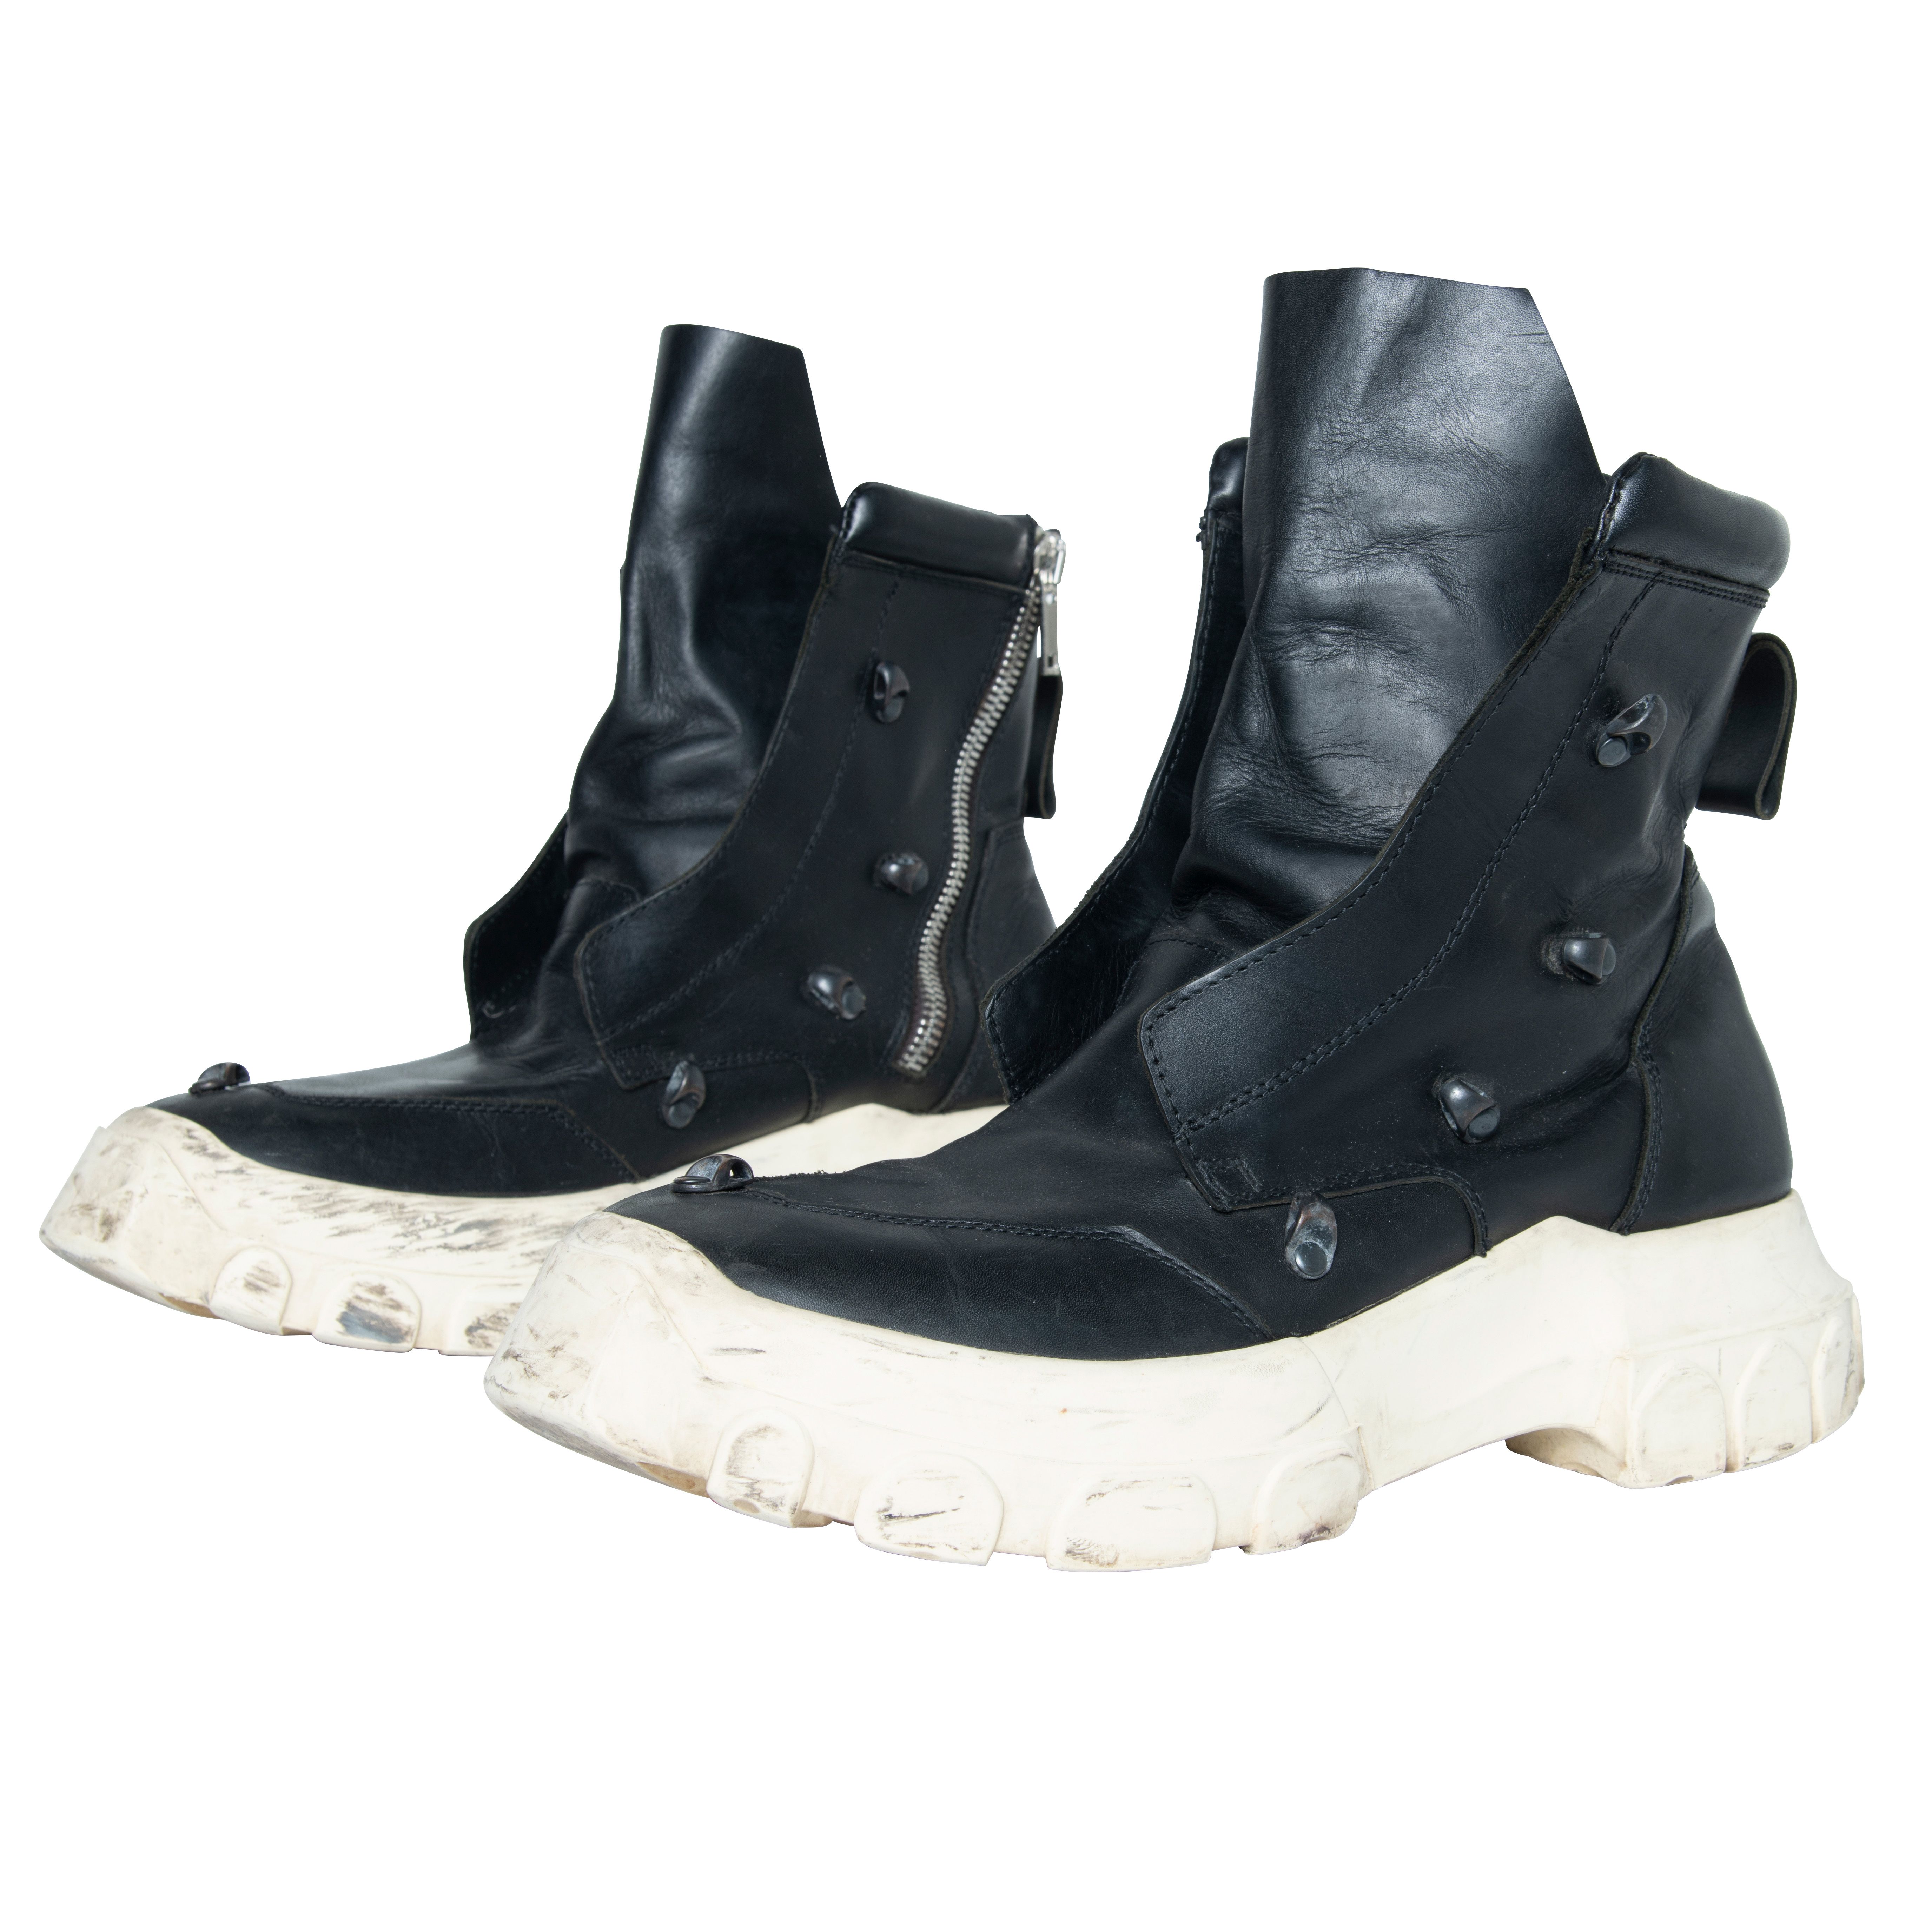 Rick Owens Tractor Hexagram Hiking Boots by Kameron Casey | Basic 